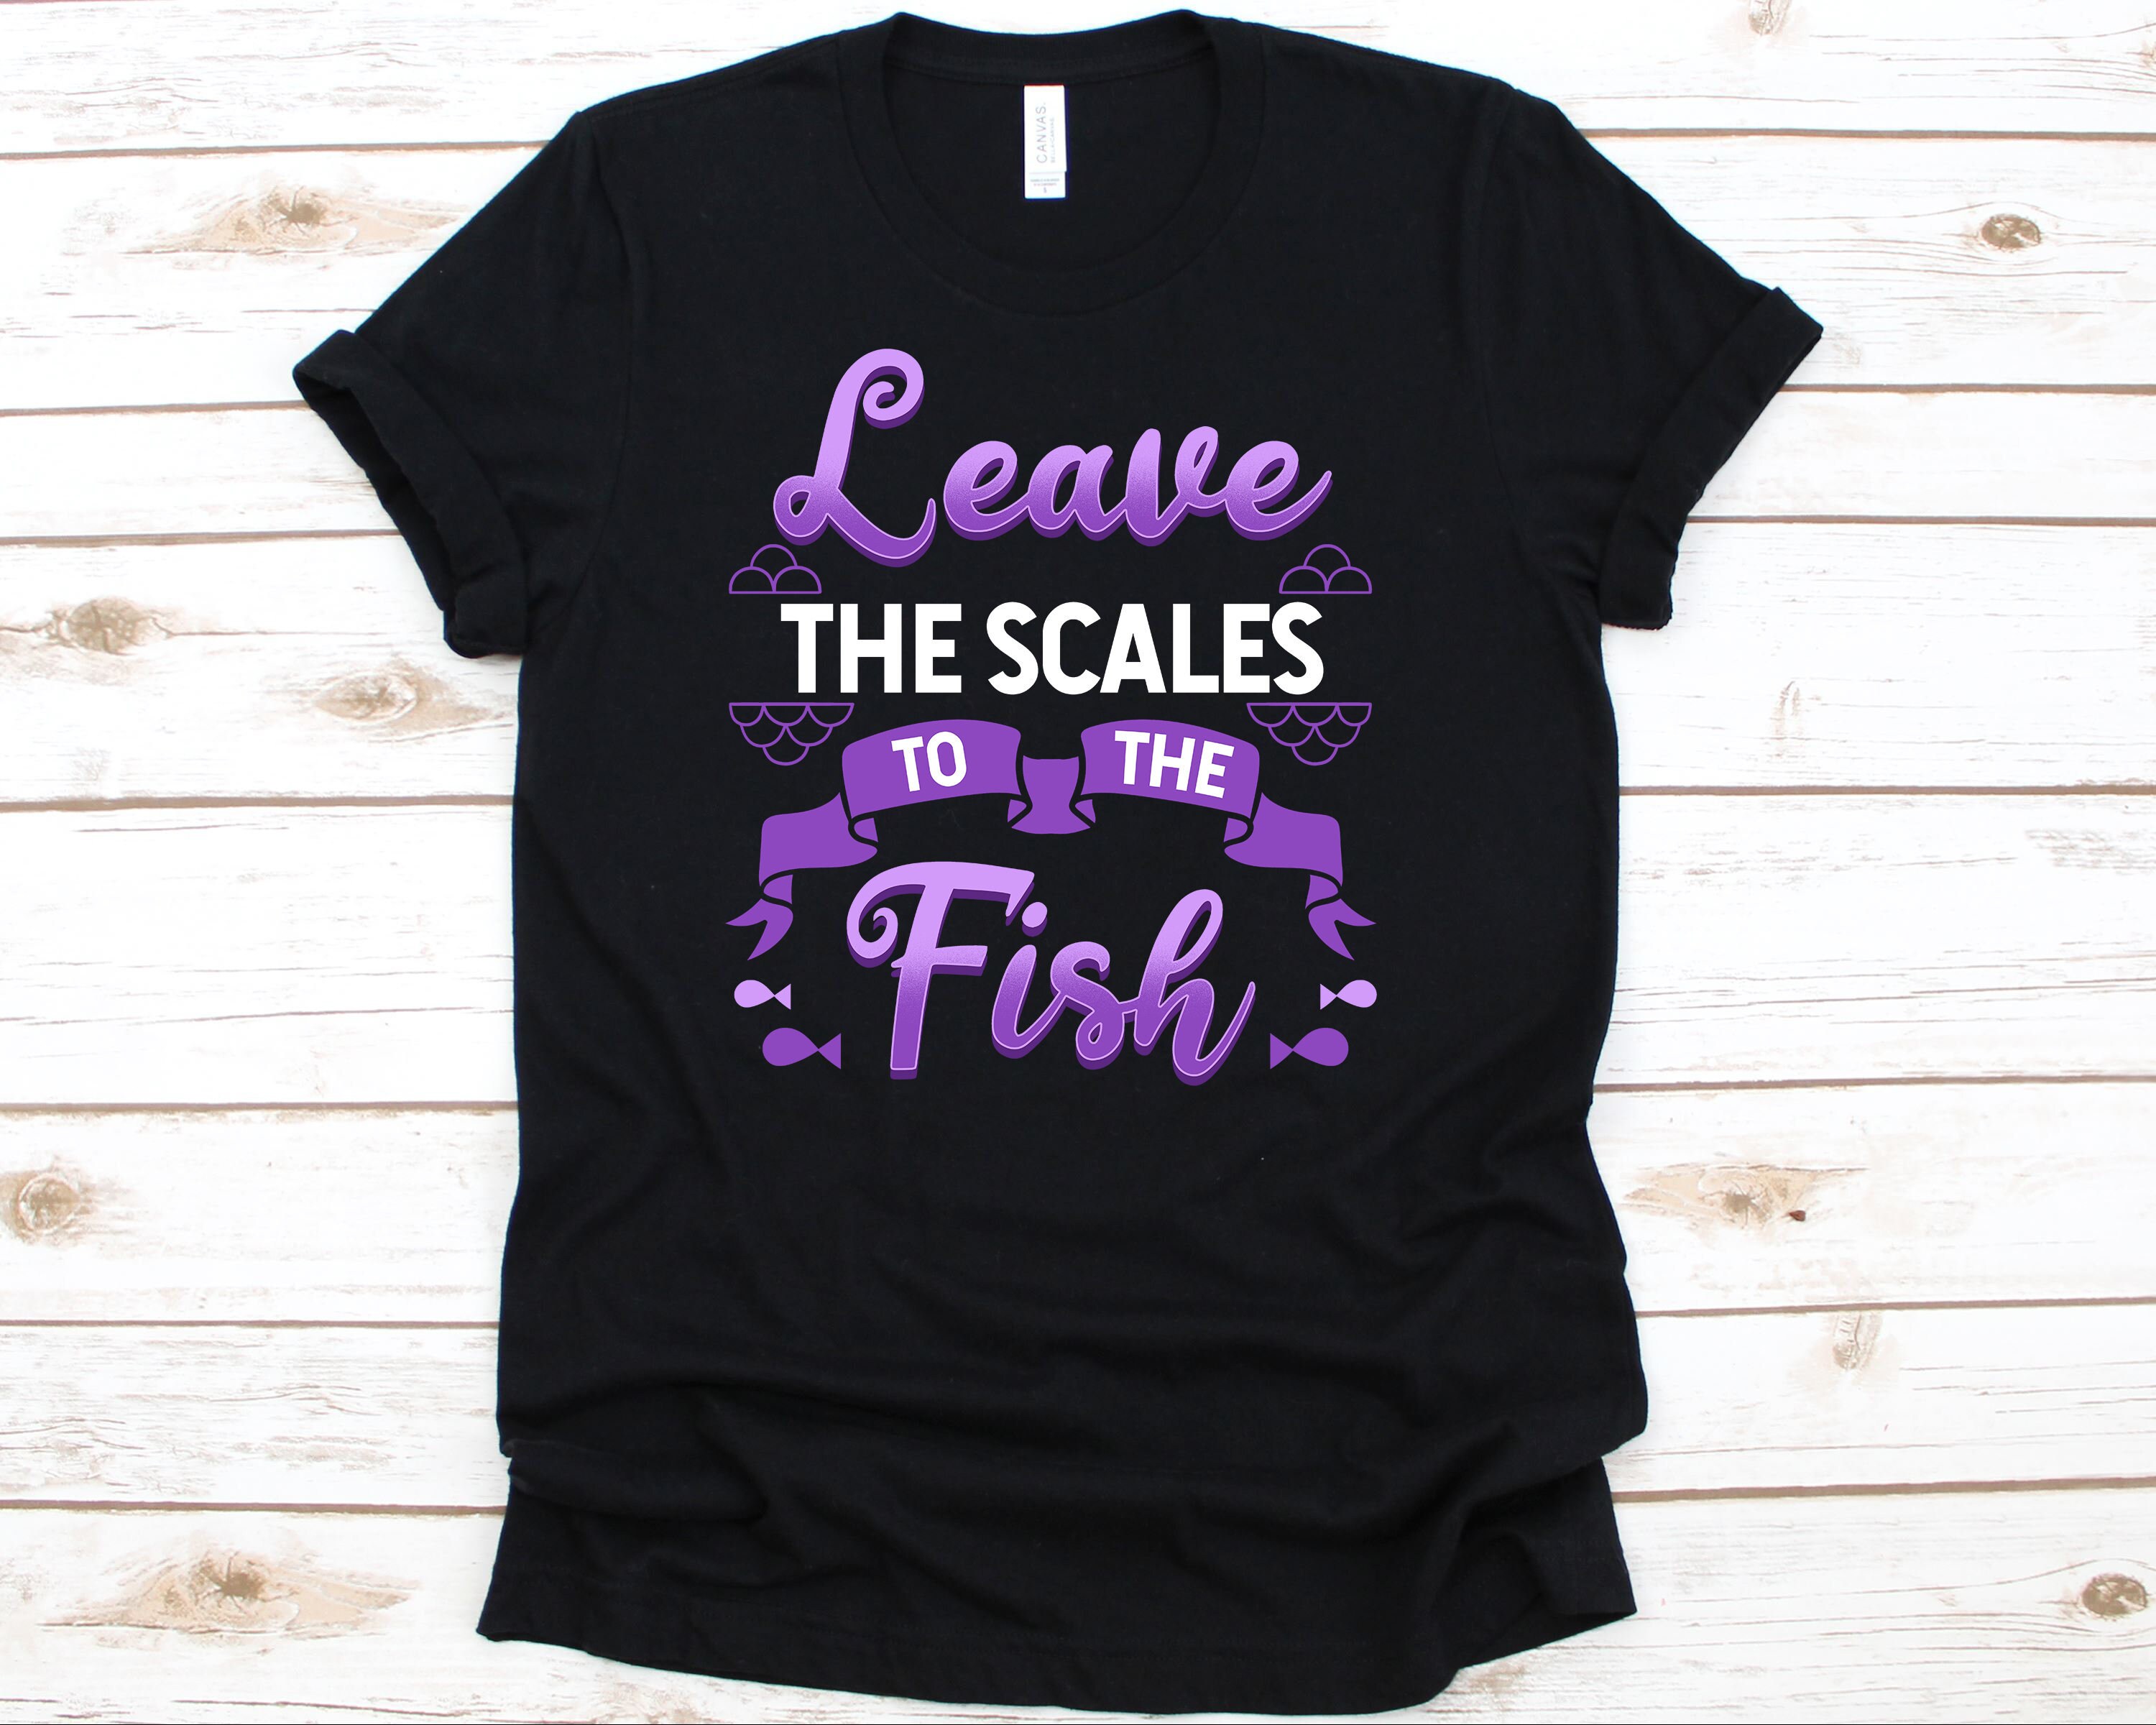 Leave the Scales to the Fish Shirt, Eating Disorder Awareness Tshirt for  Men Women With Eating Disorders, Mental Heath Recovery Tee -  Ireland